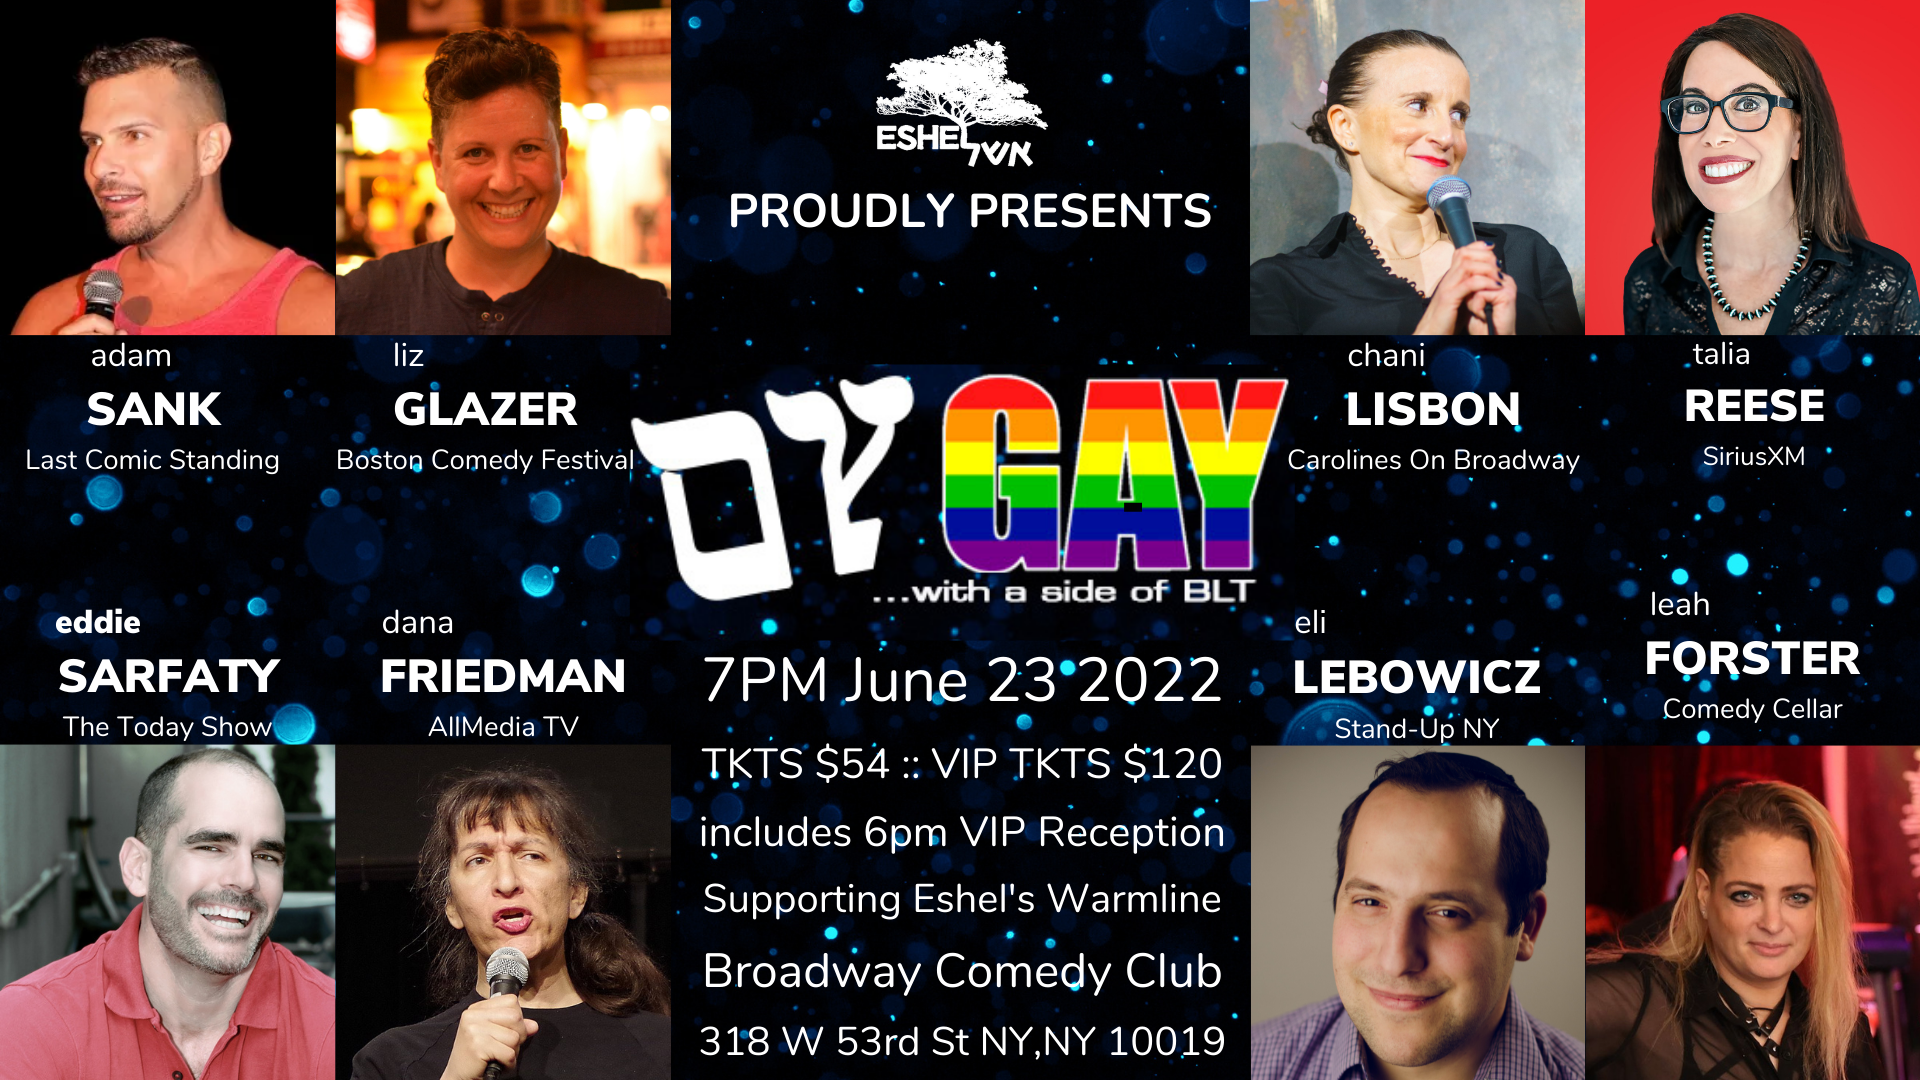 Eshel Proudly Presents "Oy Gay, with a side of BLT" 7pm June 23 2022 TKTS $54 VIP TKTS $120 includes 6 pm VIP Reception. Supporting Eshel's Warmline. Broadway Comedy Club, 318 W 53rd St NY, NY 10019